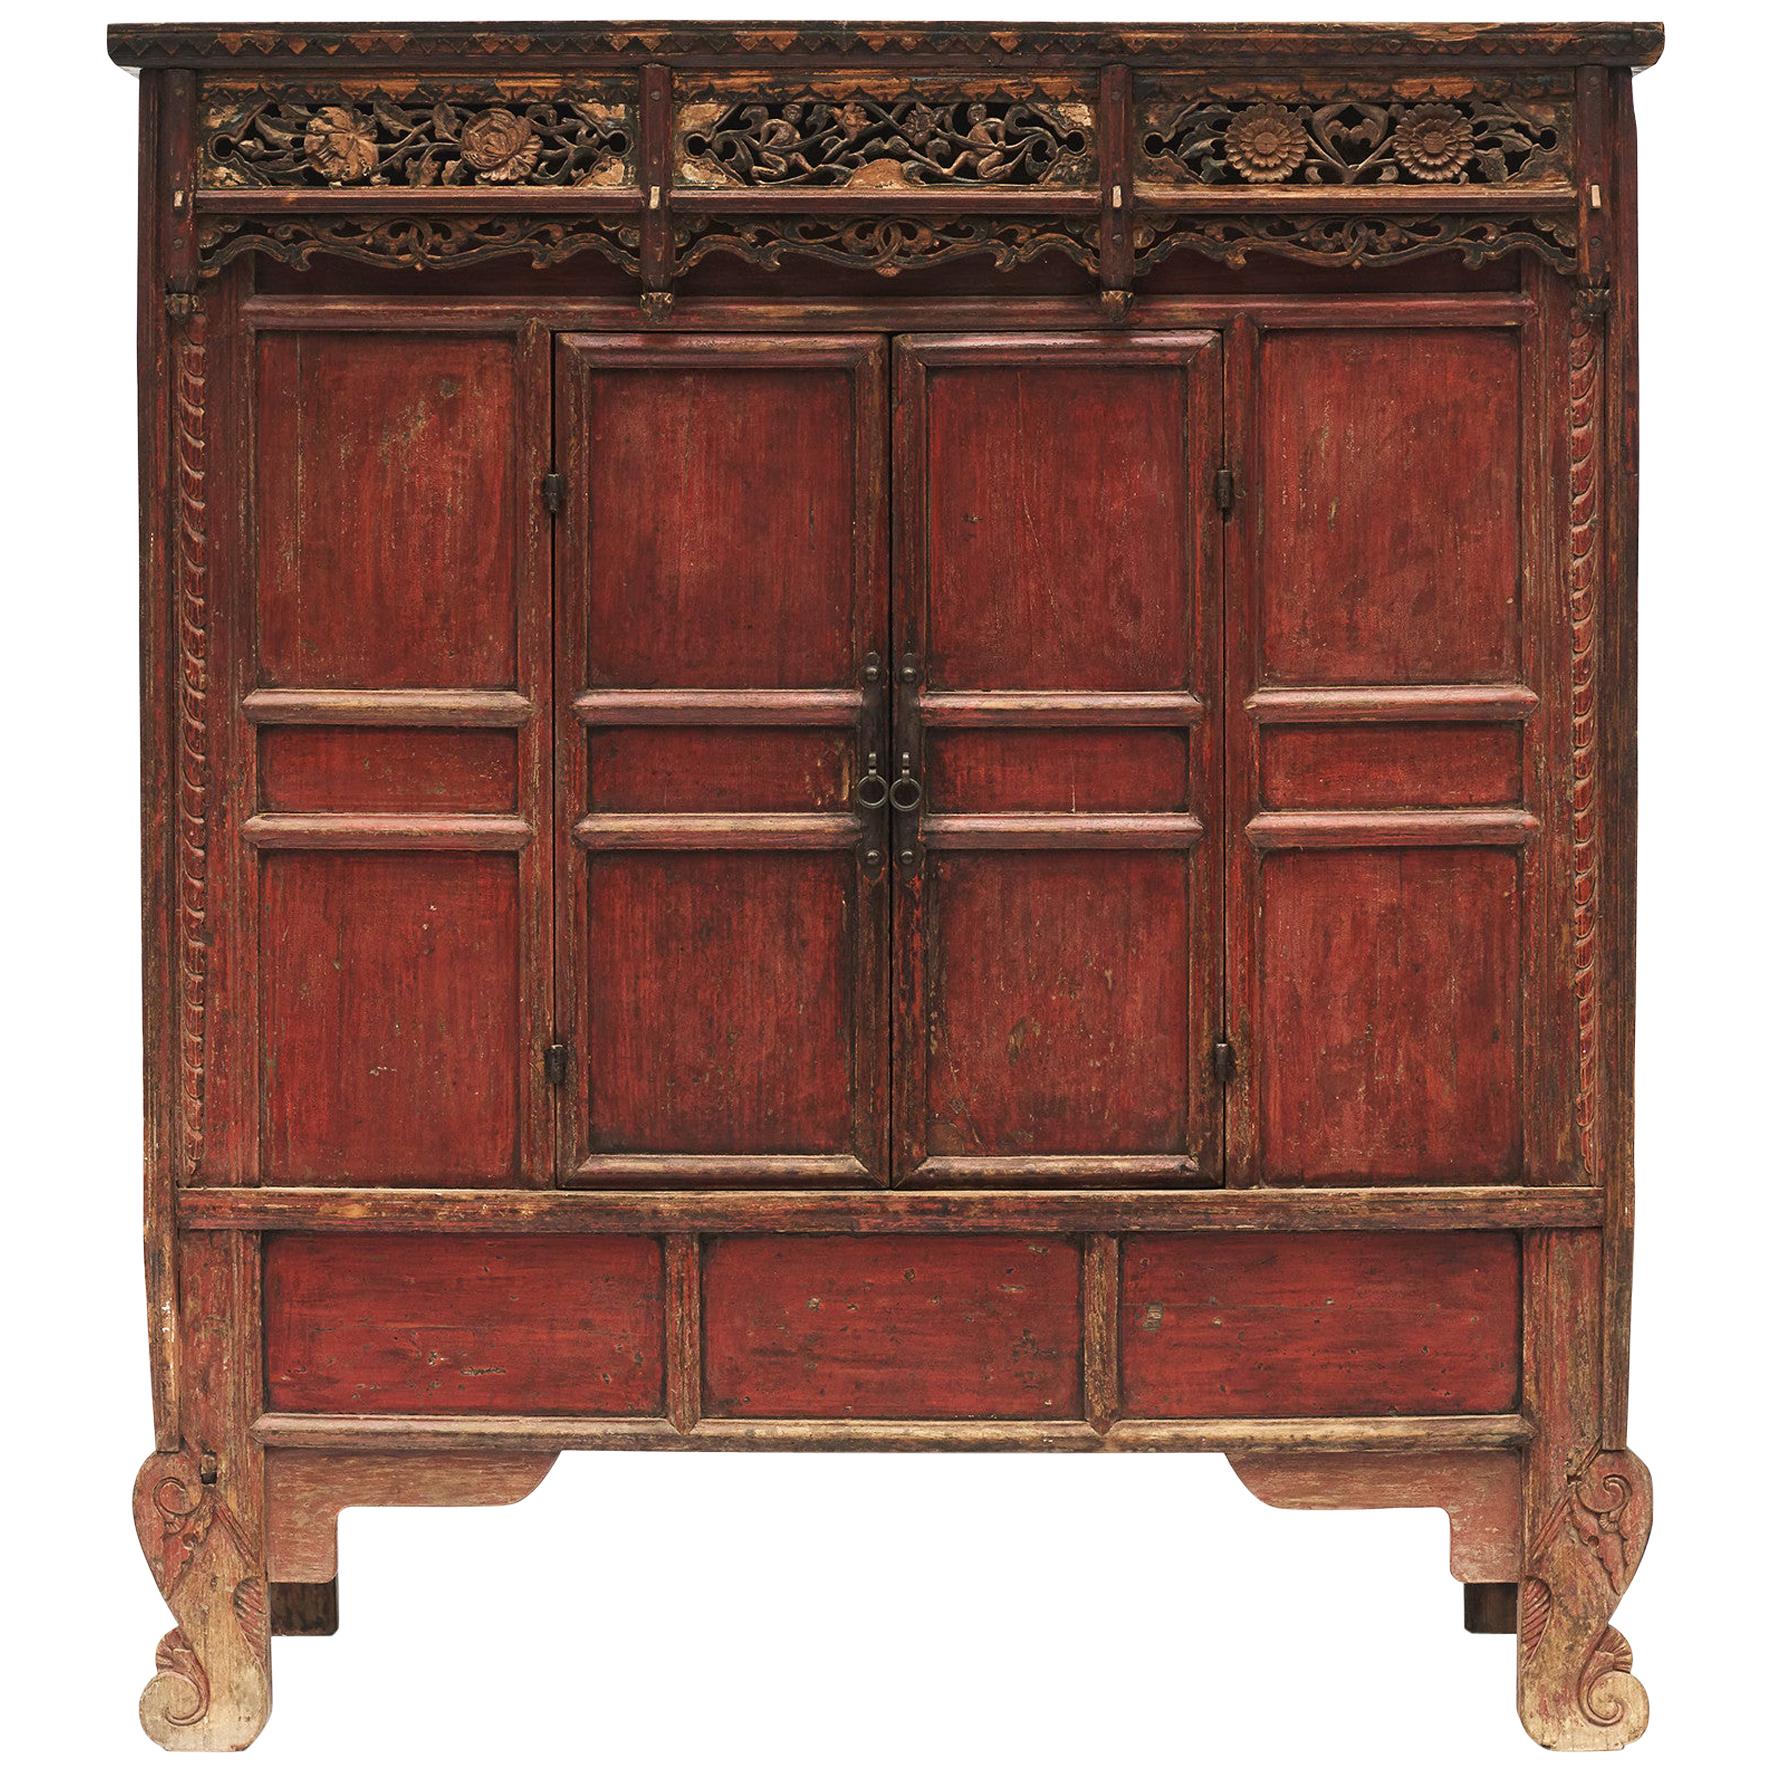 15th-16th Century Ming Dynasty Cabinet. Red Lacquer